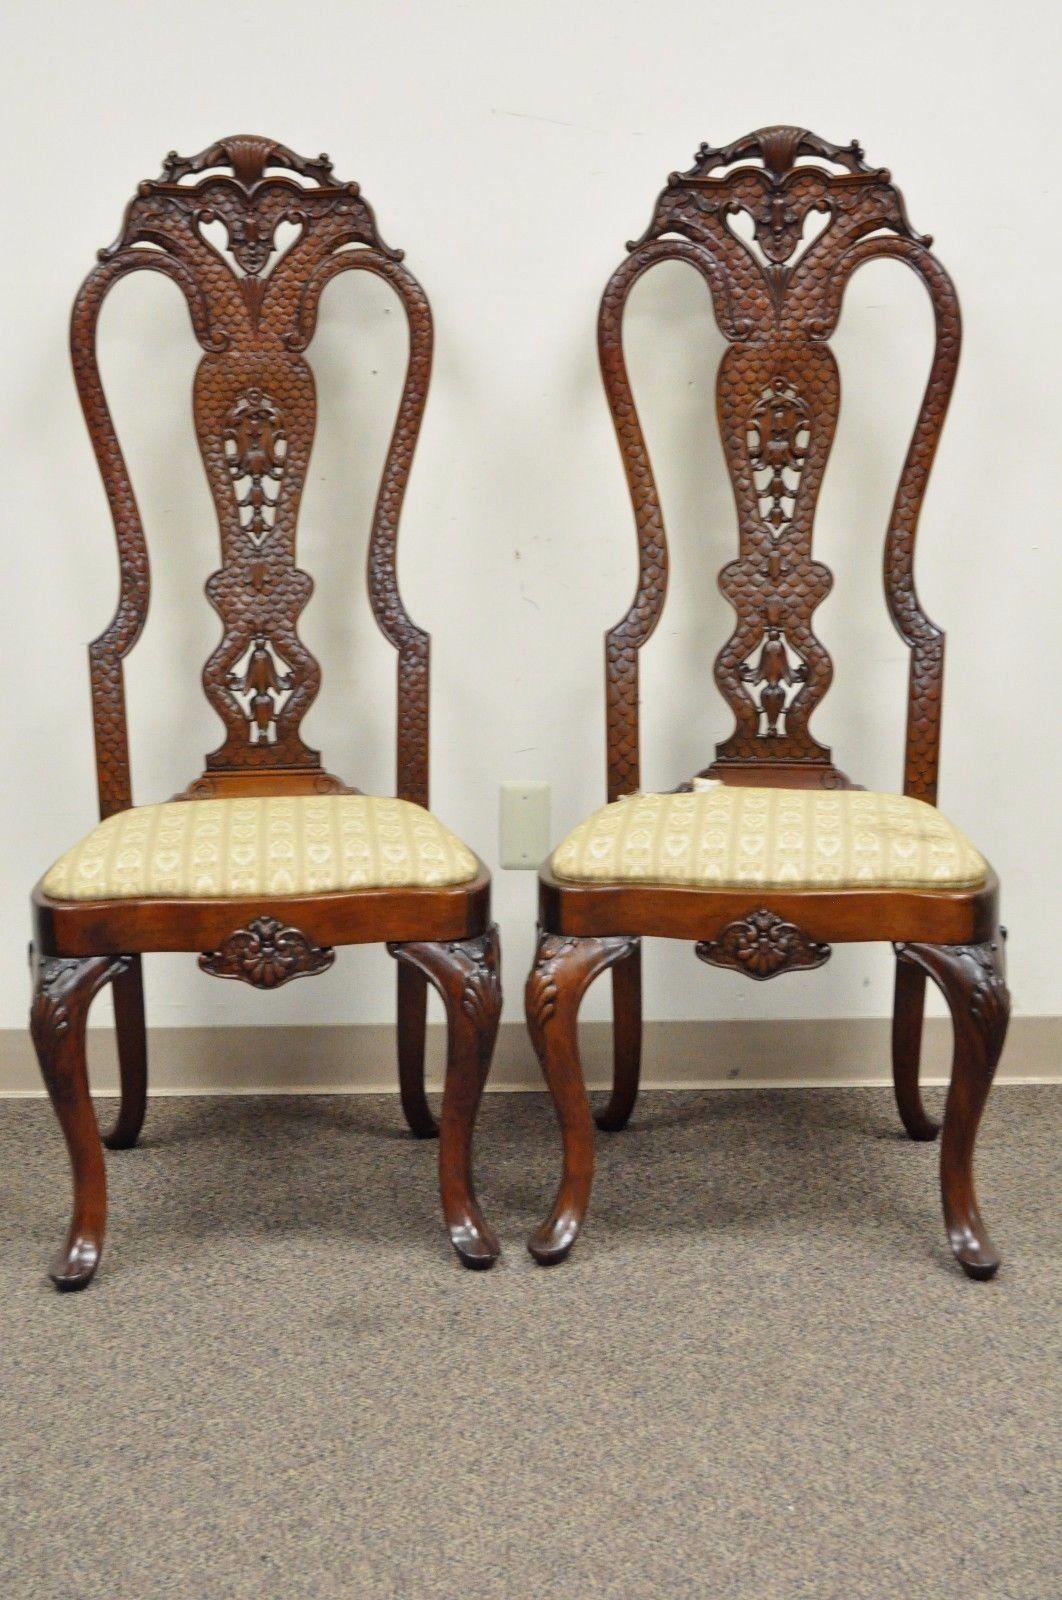 Pair of vintage solid mahogany continental style side chairs. Item features carved solid mahogany frames, tall dragon/reptile scale backs, cabriole legs, pad feet, drop seats, great quality and overall form, circa mid-20th century. Measurements: